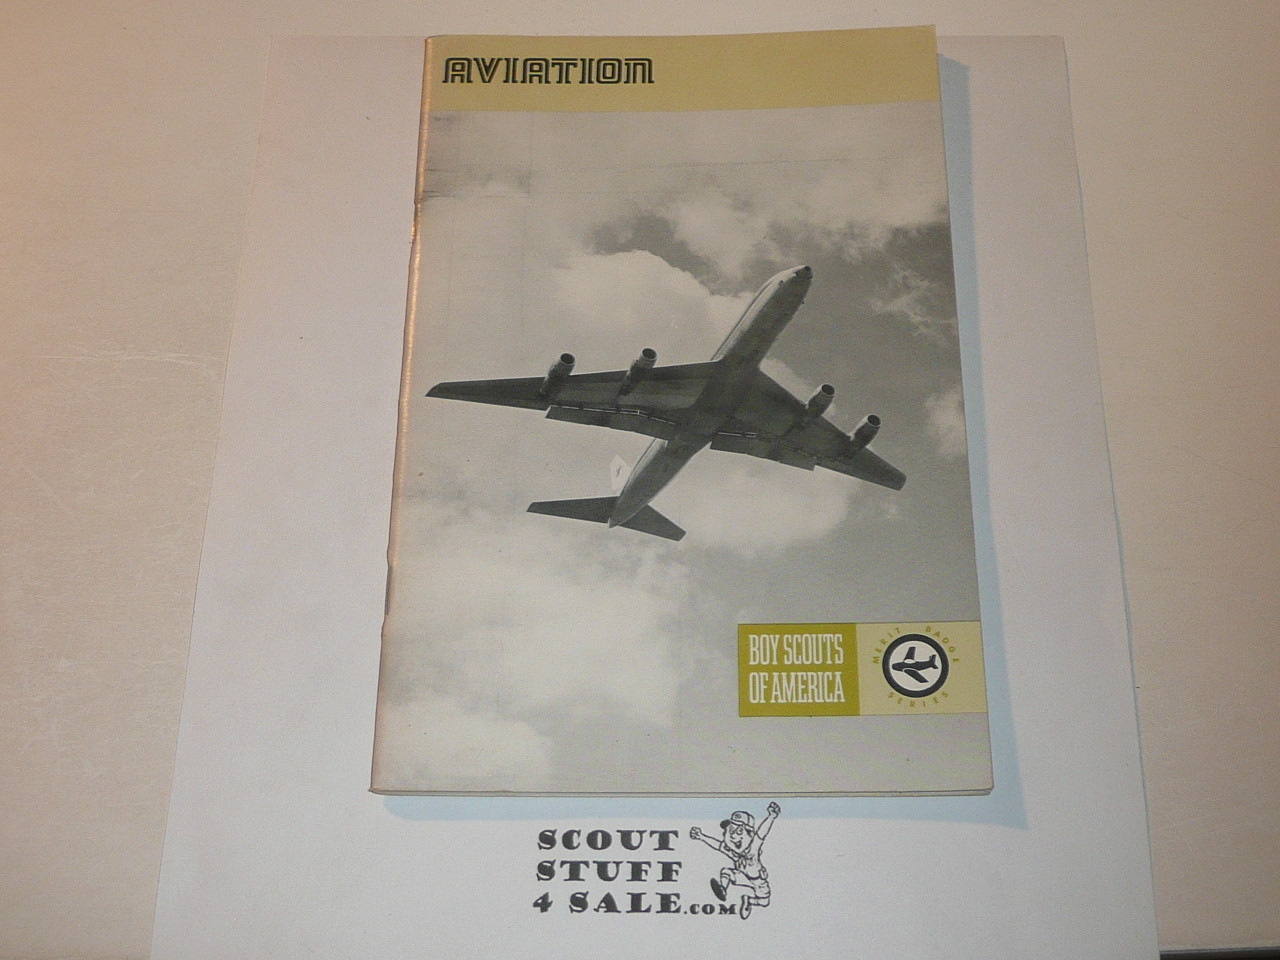 Aviation Merit Badge Pamphlet, Type 8, Full Picture, 7-77 Printing